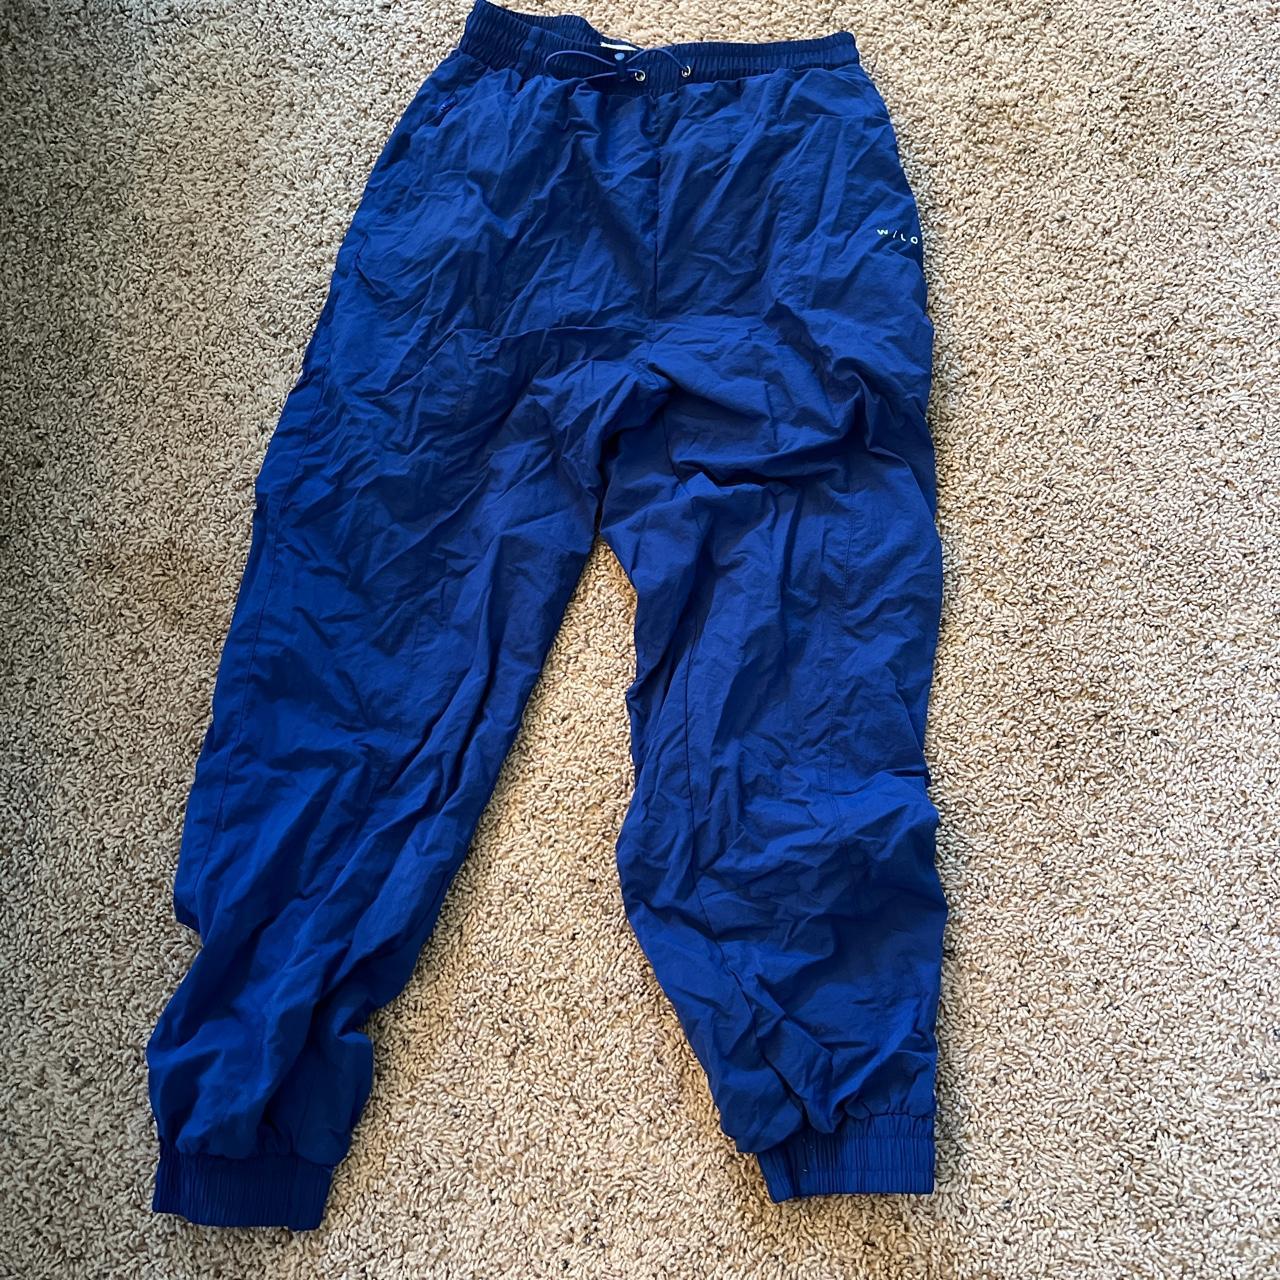 Vintage Nike parachute pants!! They are so comfy and - Depop